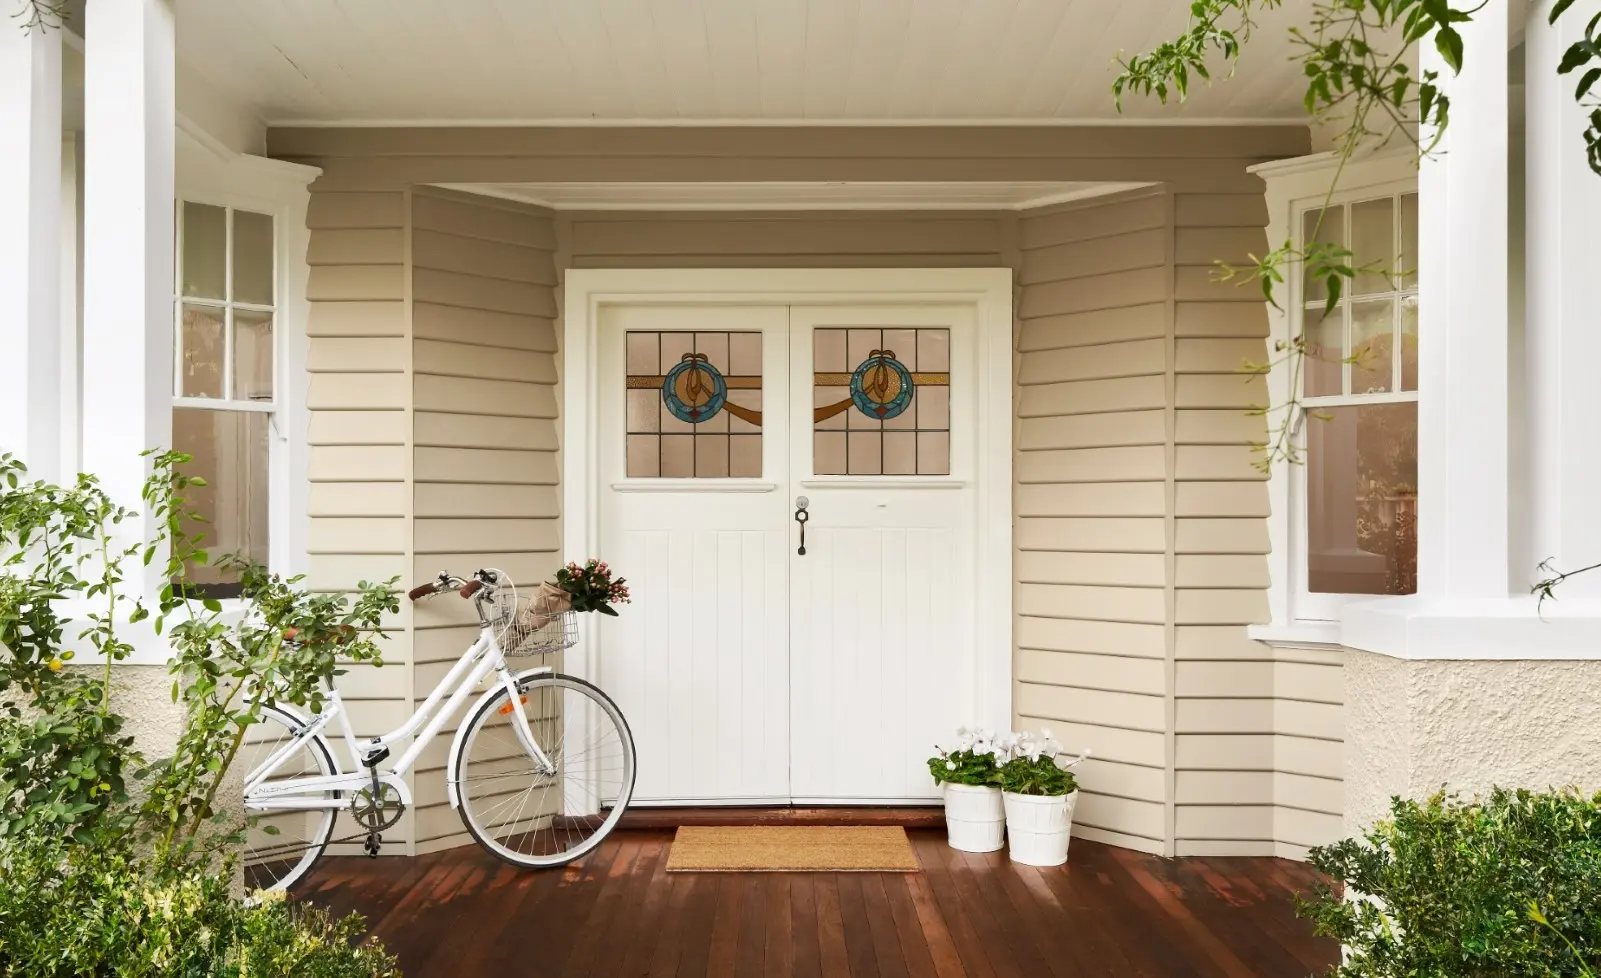 White door against weatherboard style home with bike leaning against wall. 